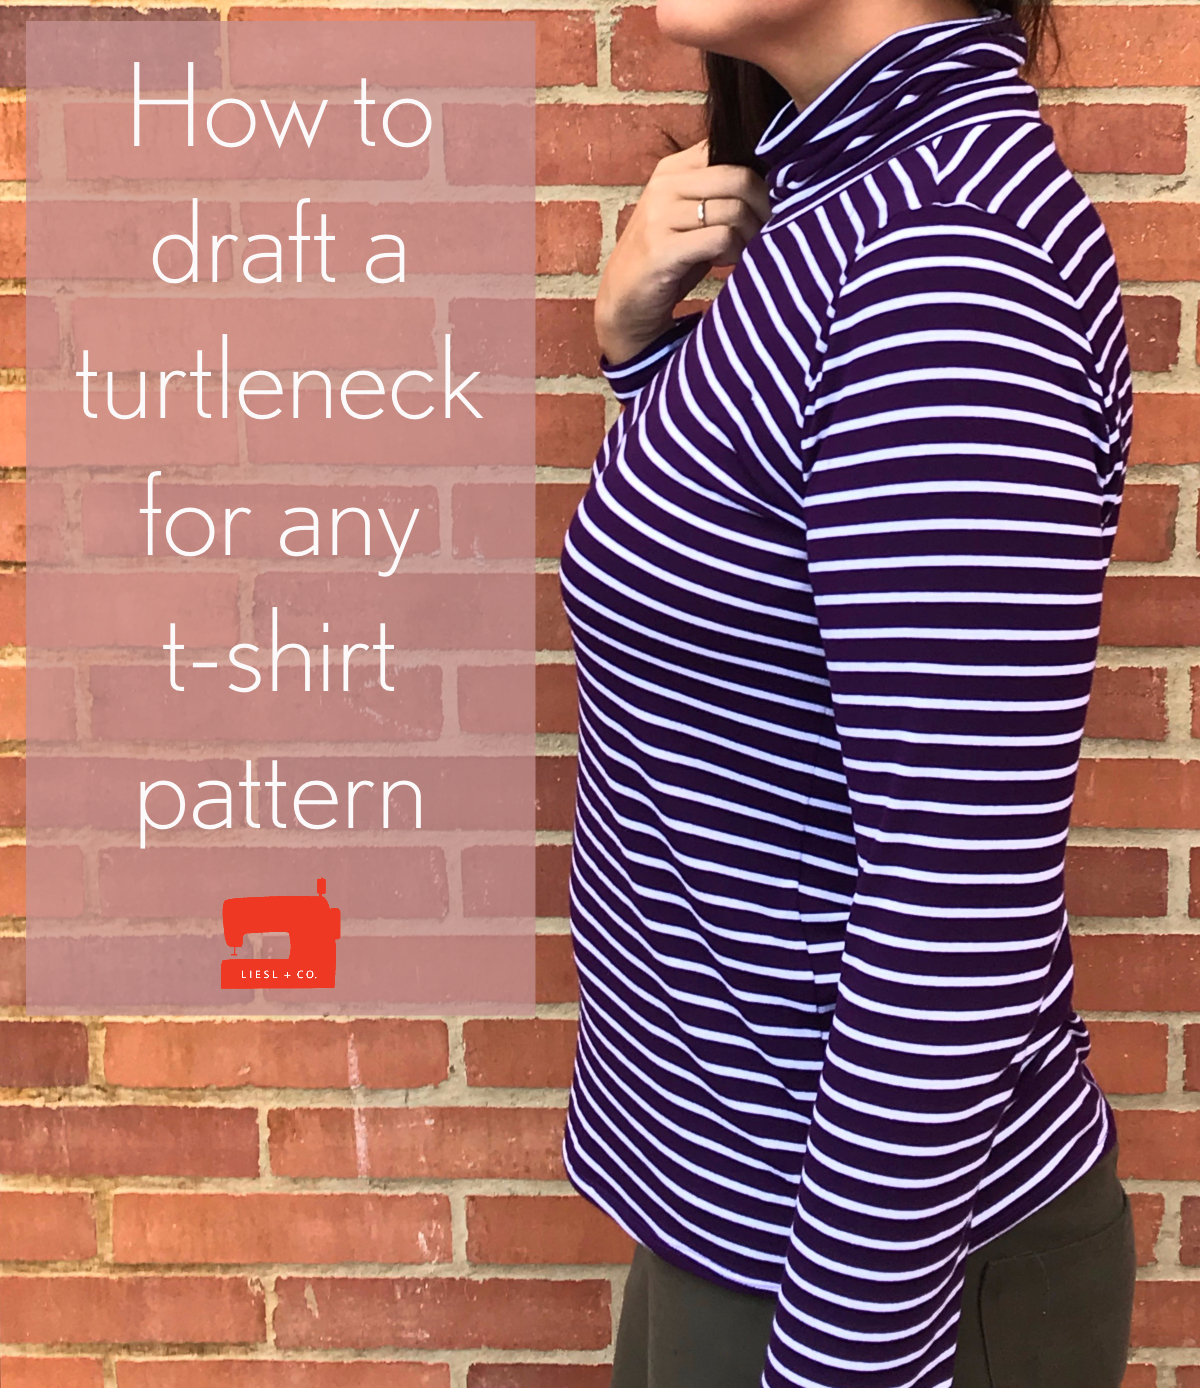 How to Draft a Turtleneck Using Any T-Shirt Pattern